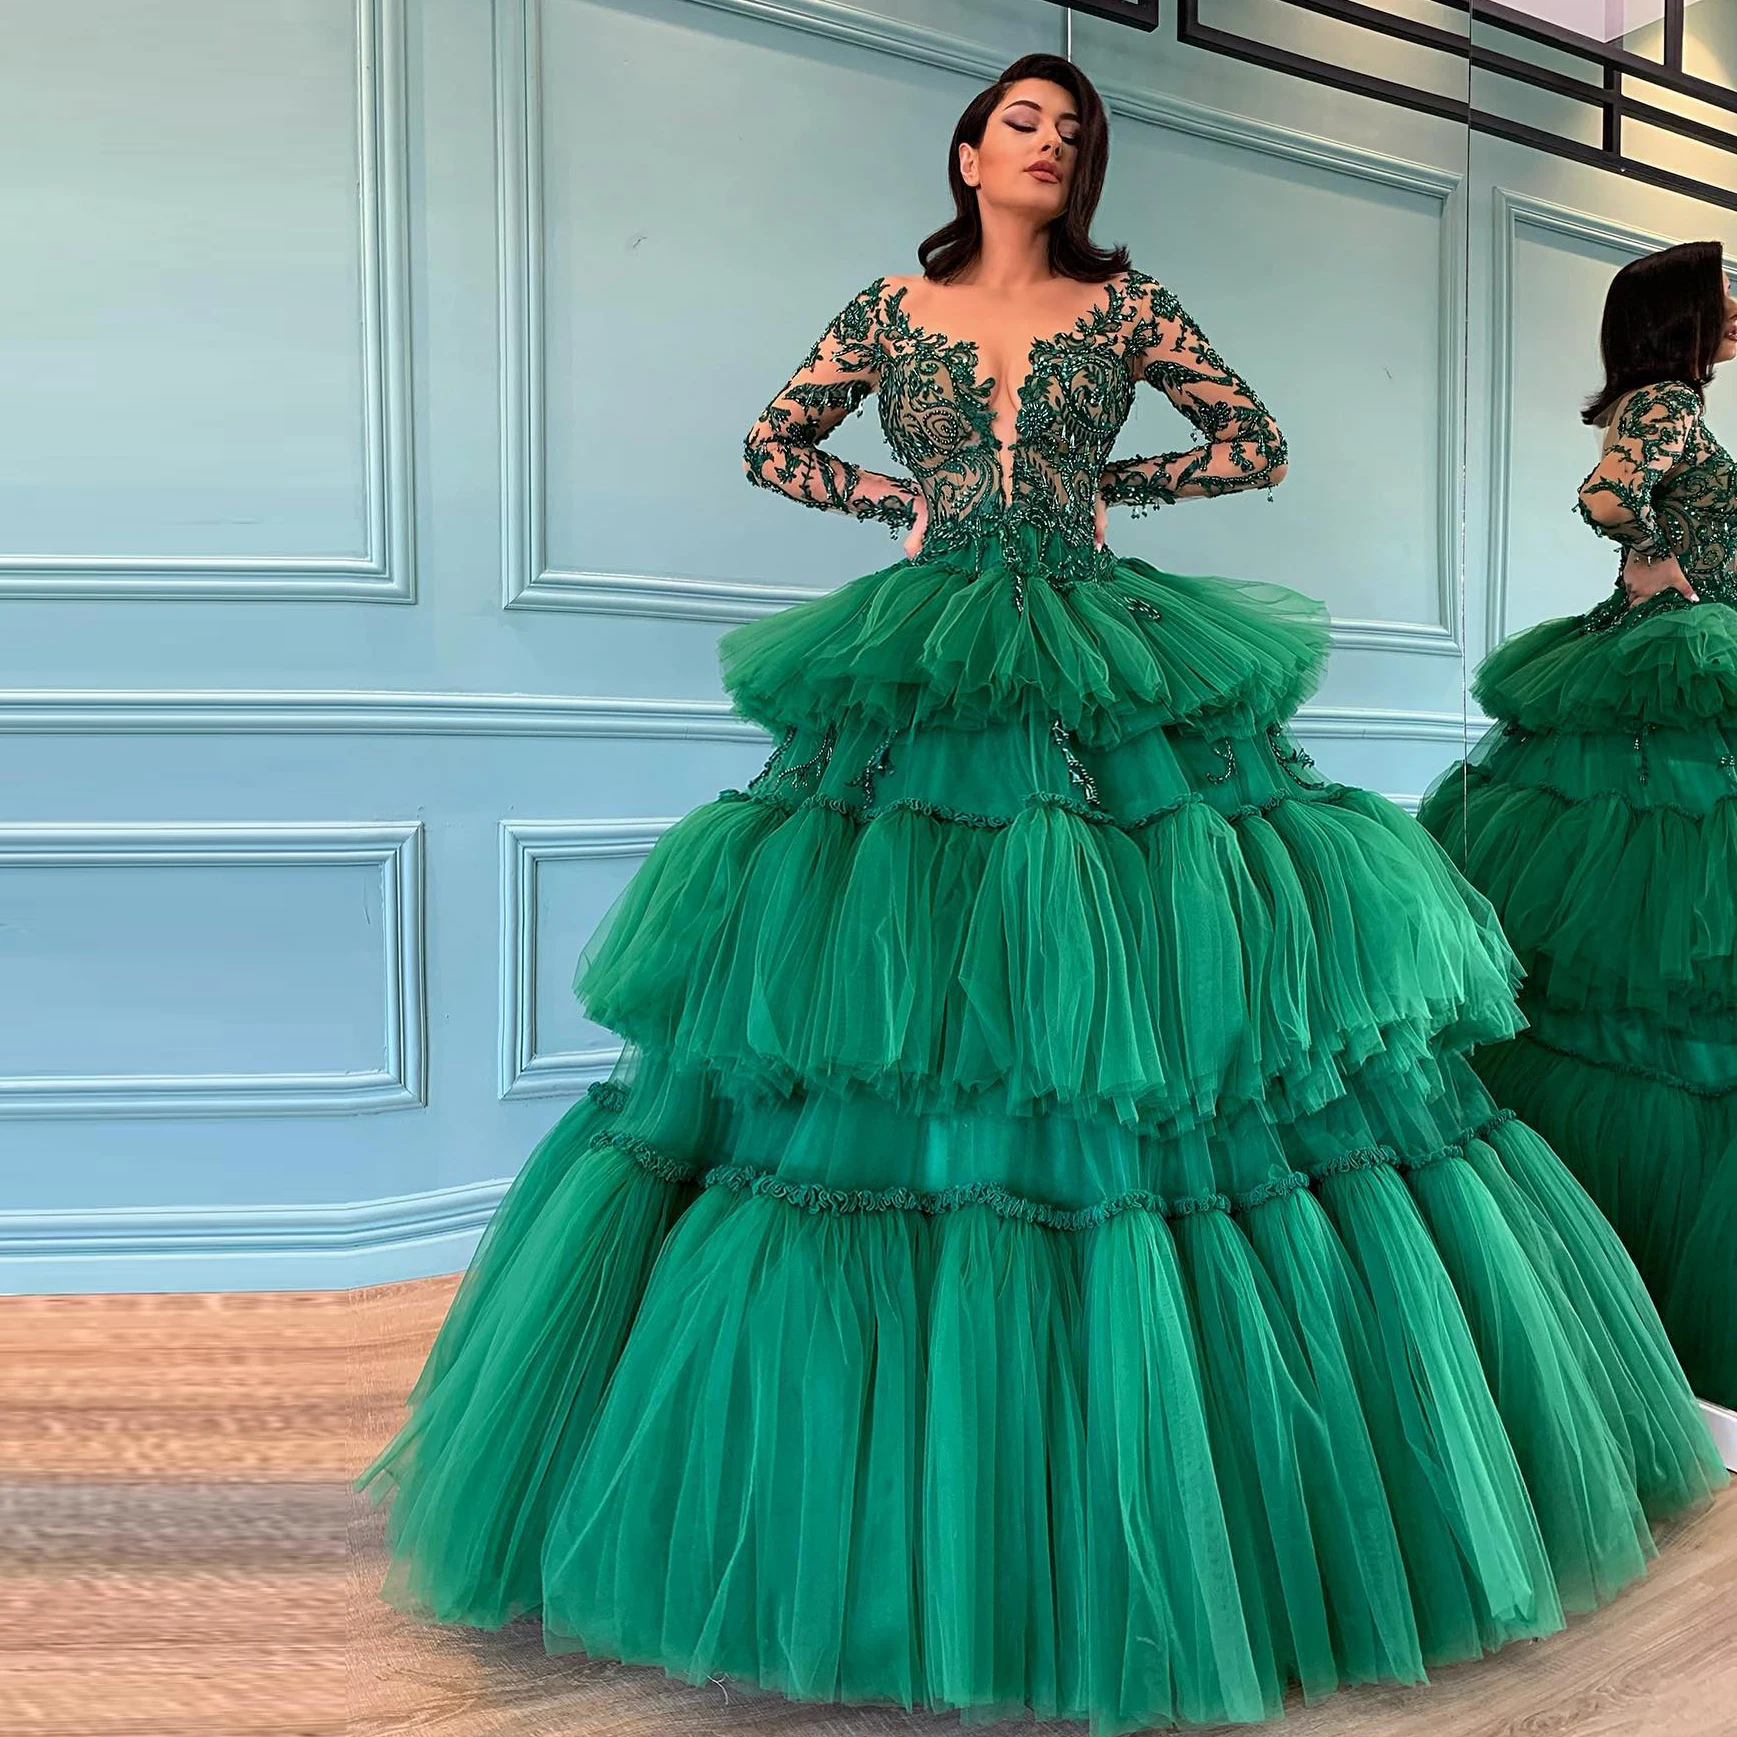 

Charming Emerald Green Prom Gowns Lace Full Sleeves Ruffles Tiered Tulle Ball Gowns Modest Long Formal Party Dress To Event